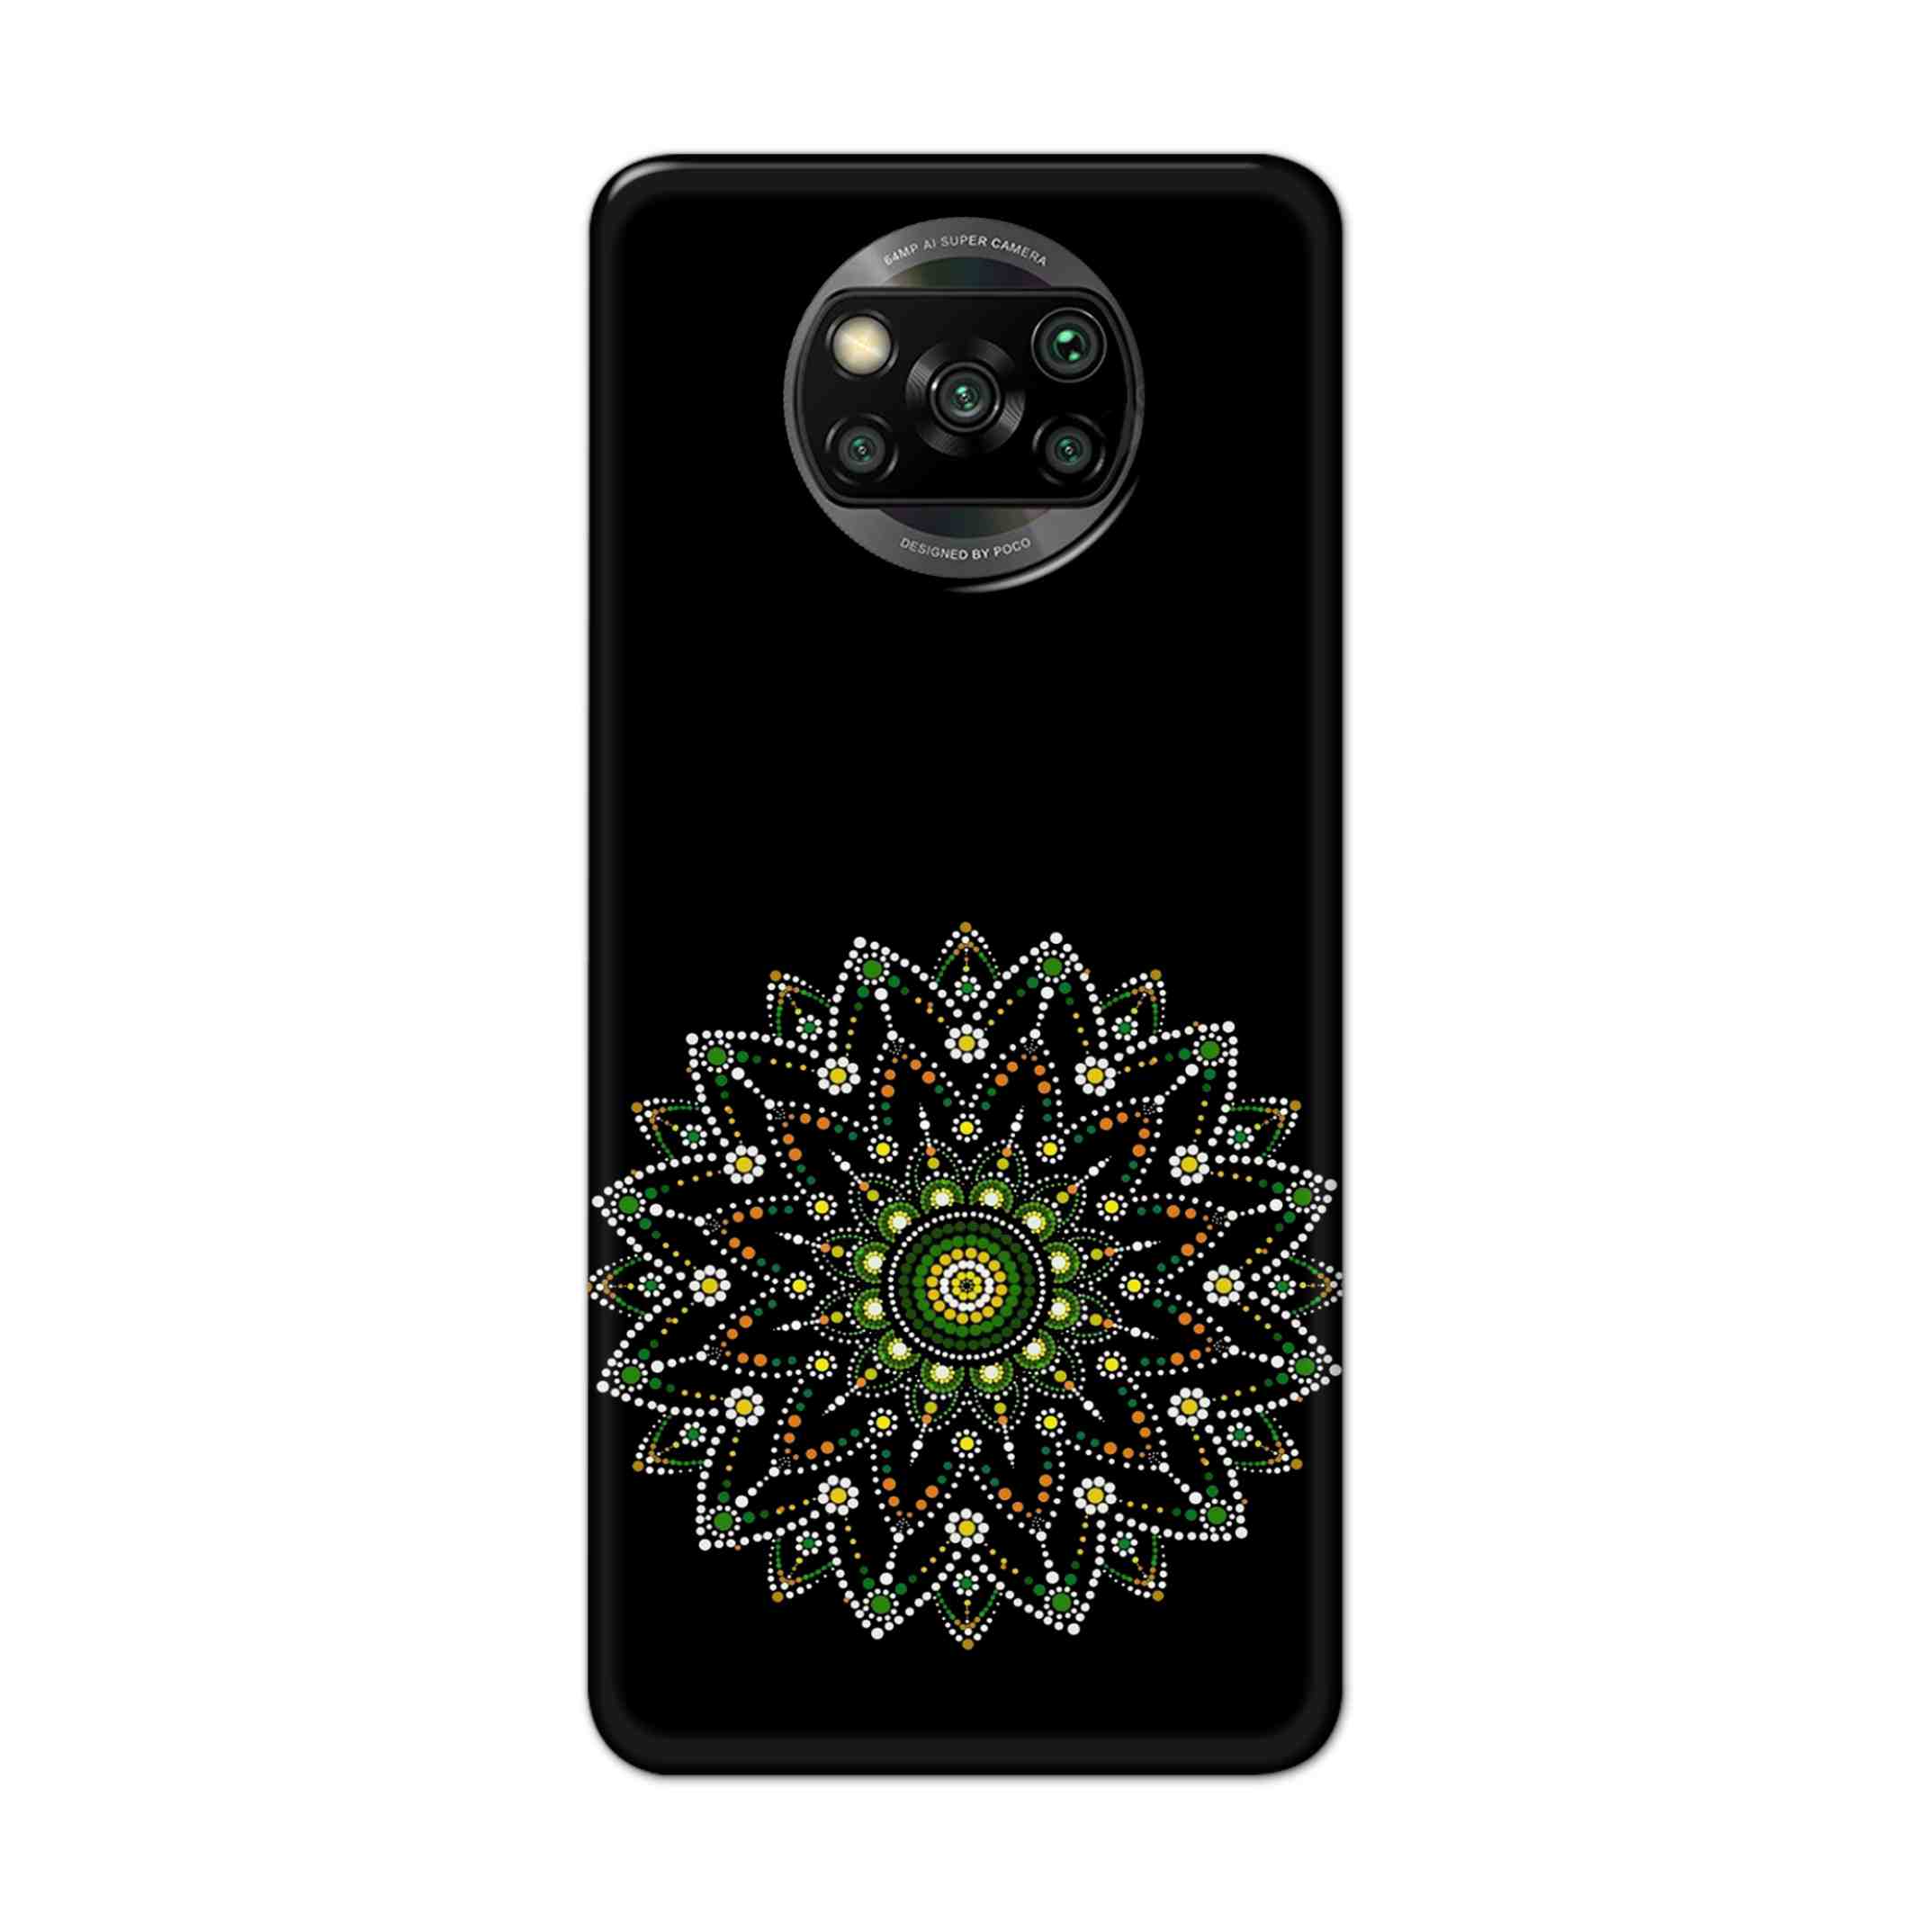 Buy Moon Mandala Hard Back Mobile Phone Case Cover For Pcoc X3 NFC Online